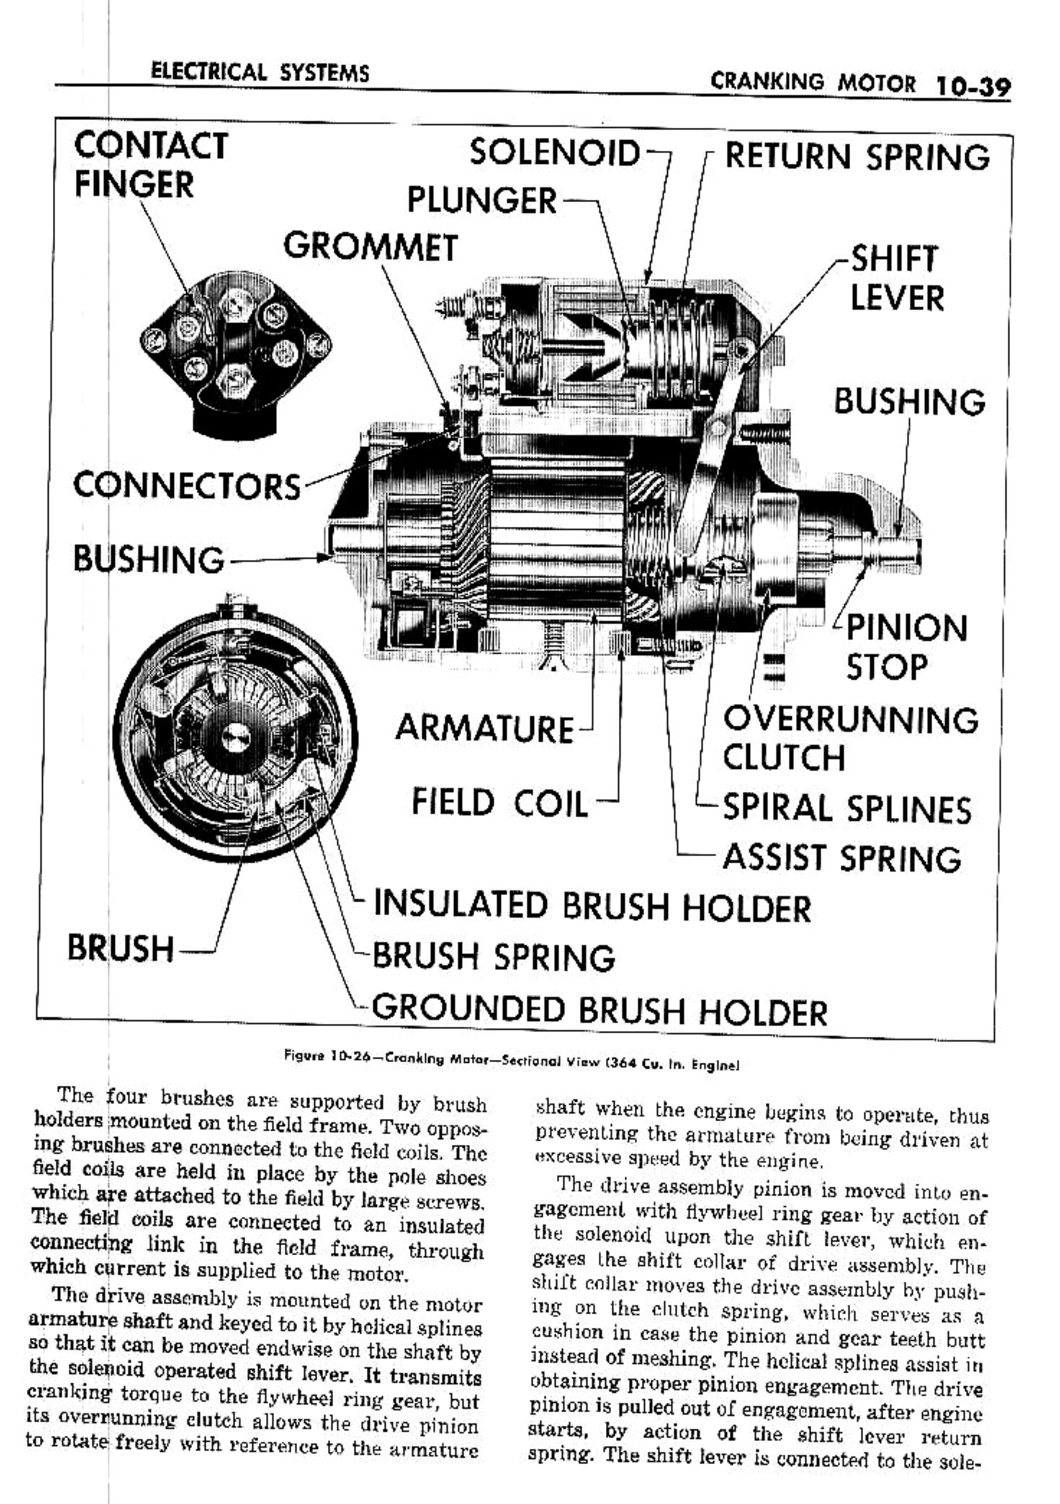 n_11 1959 Buick Shop Manual - Electrical Systems-039-039.jpg